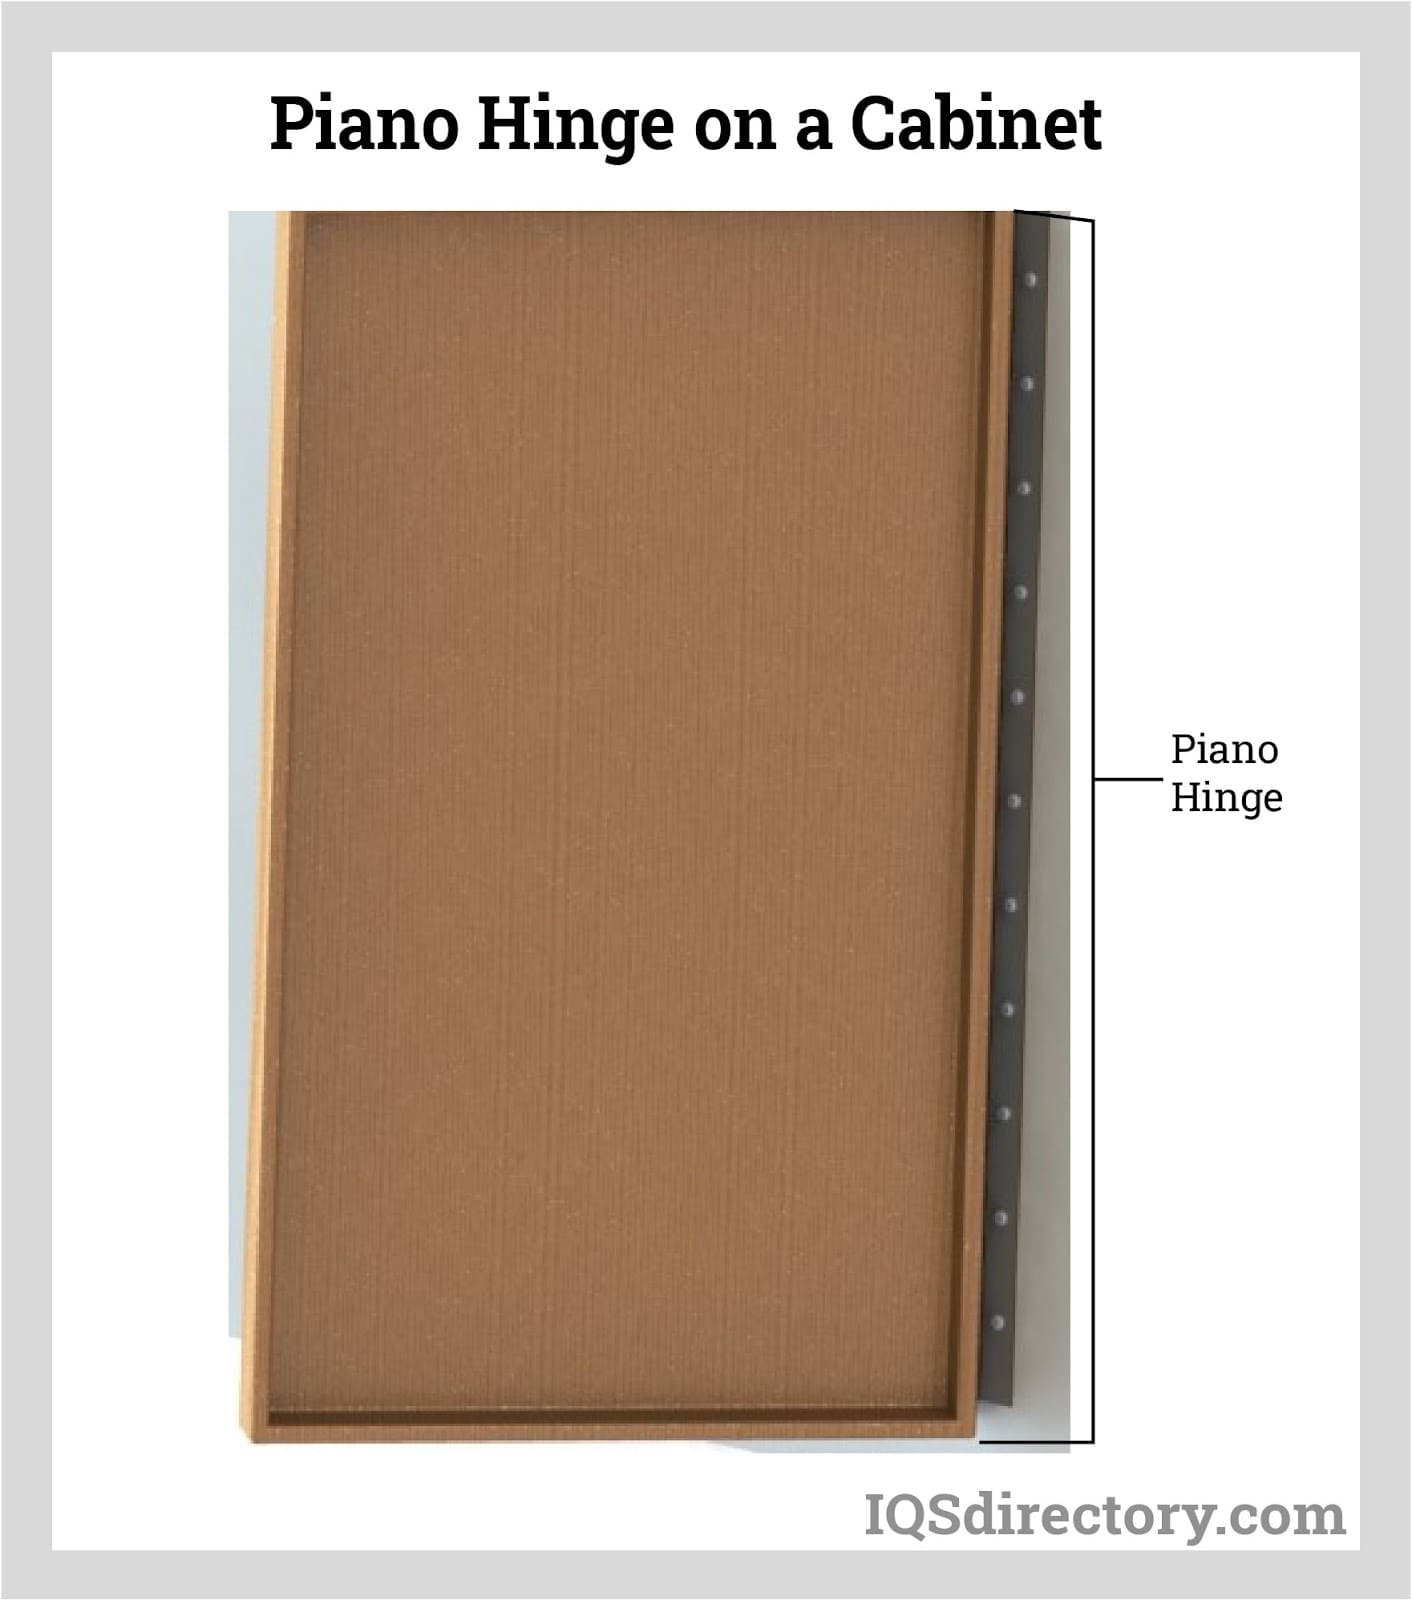 Piano Hinge on a Cabinet